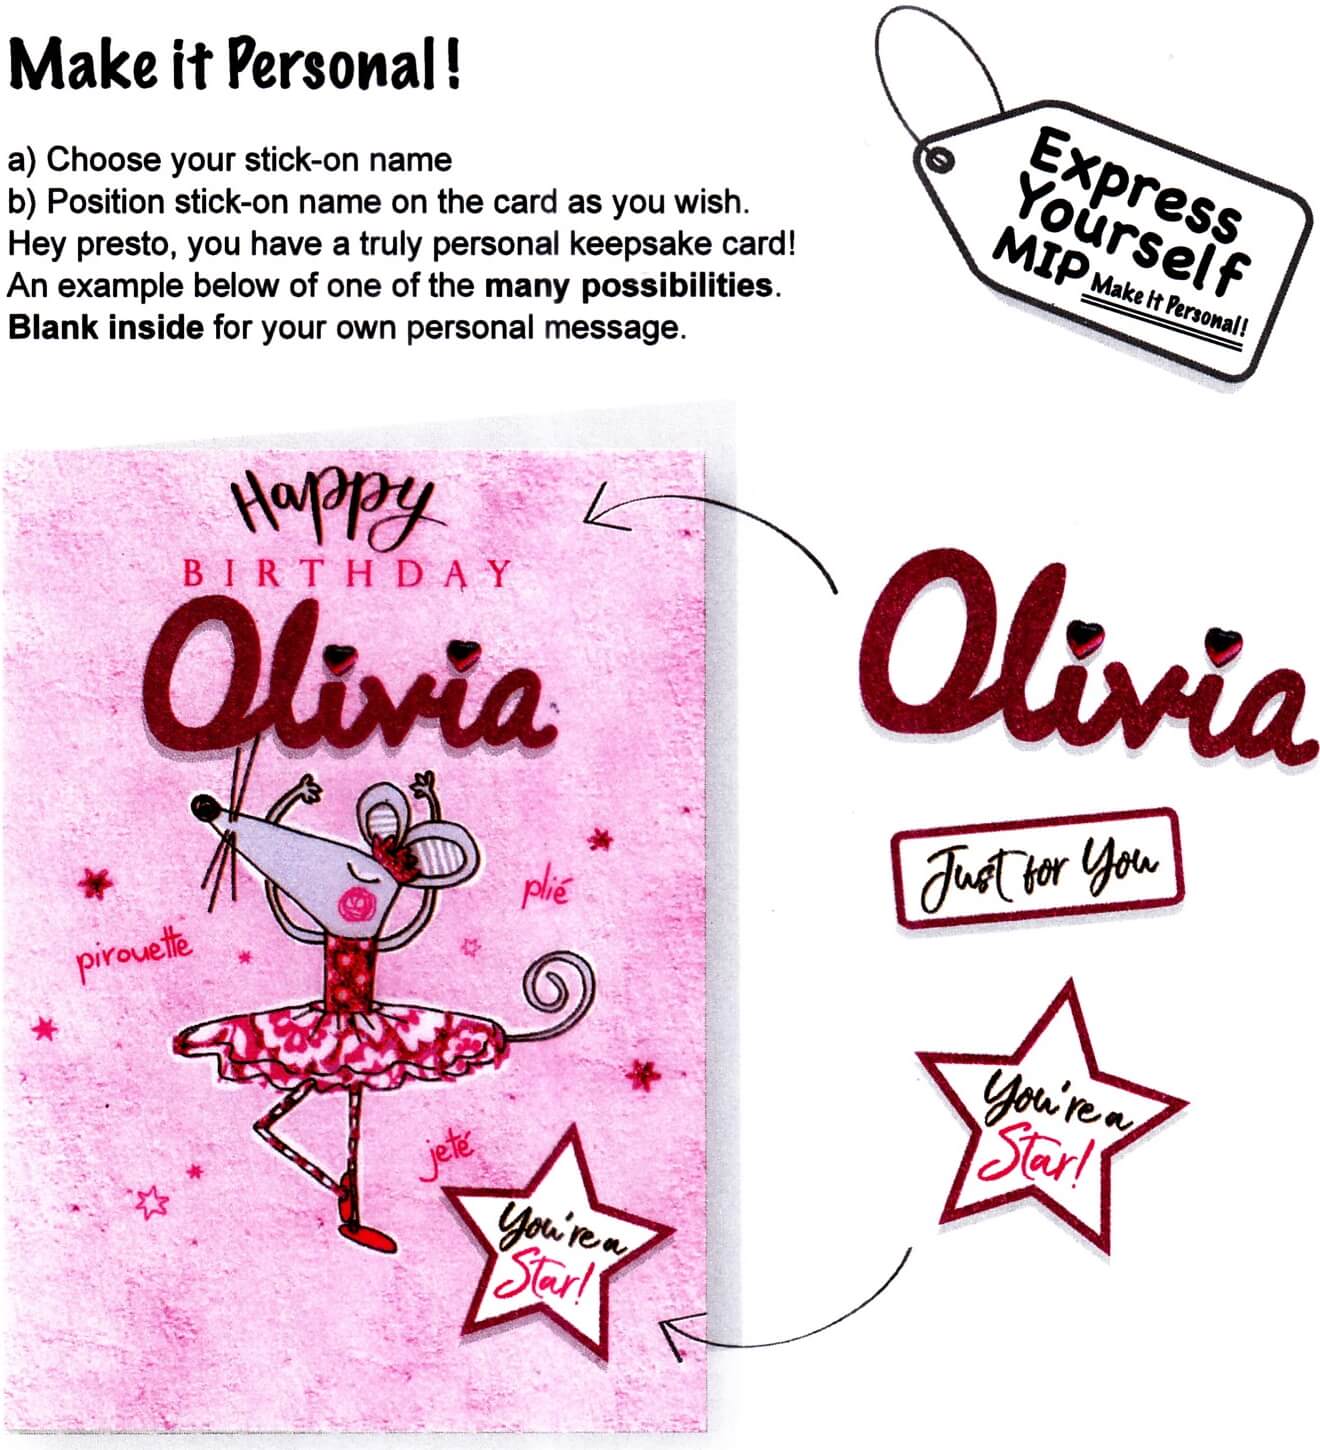 Greeting card for a person named Olivia